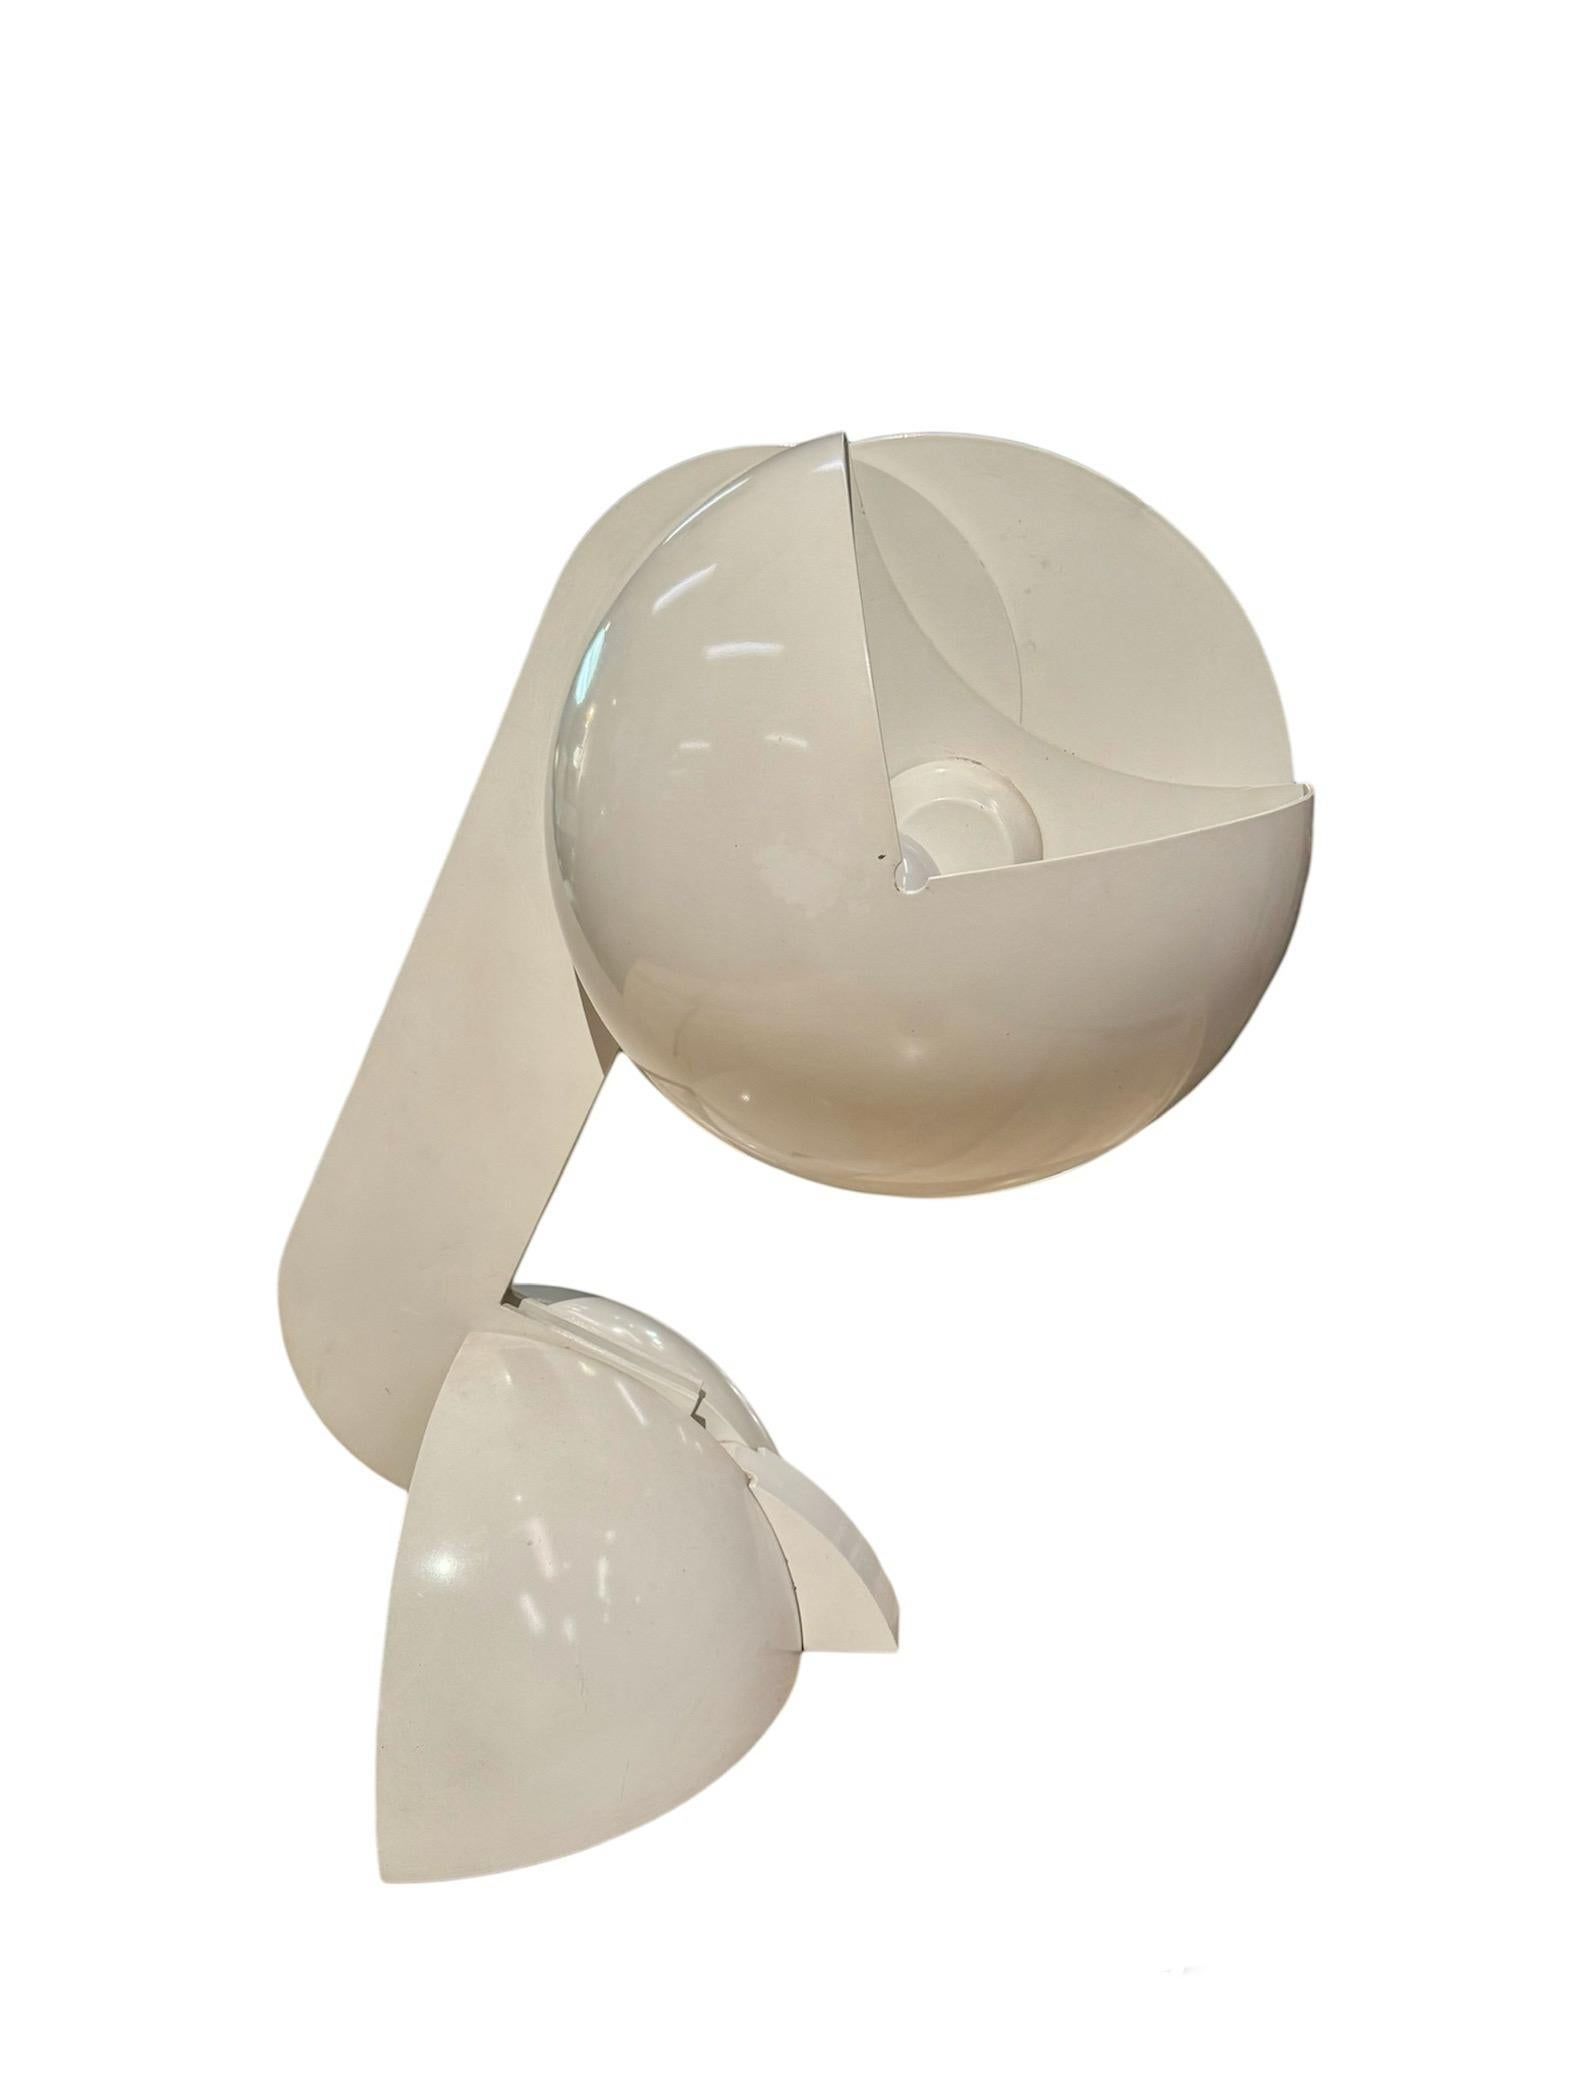 Post-Modern Gae Aulenti early edition of the Ruspa table lamp For Sale